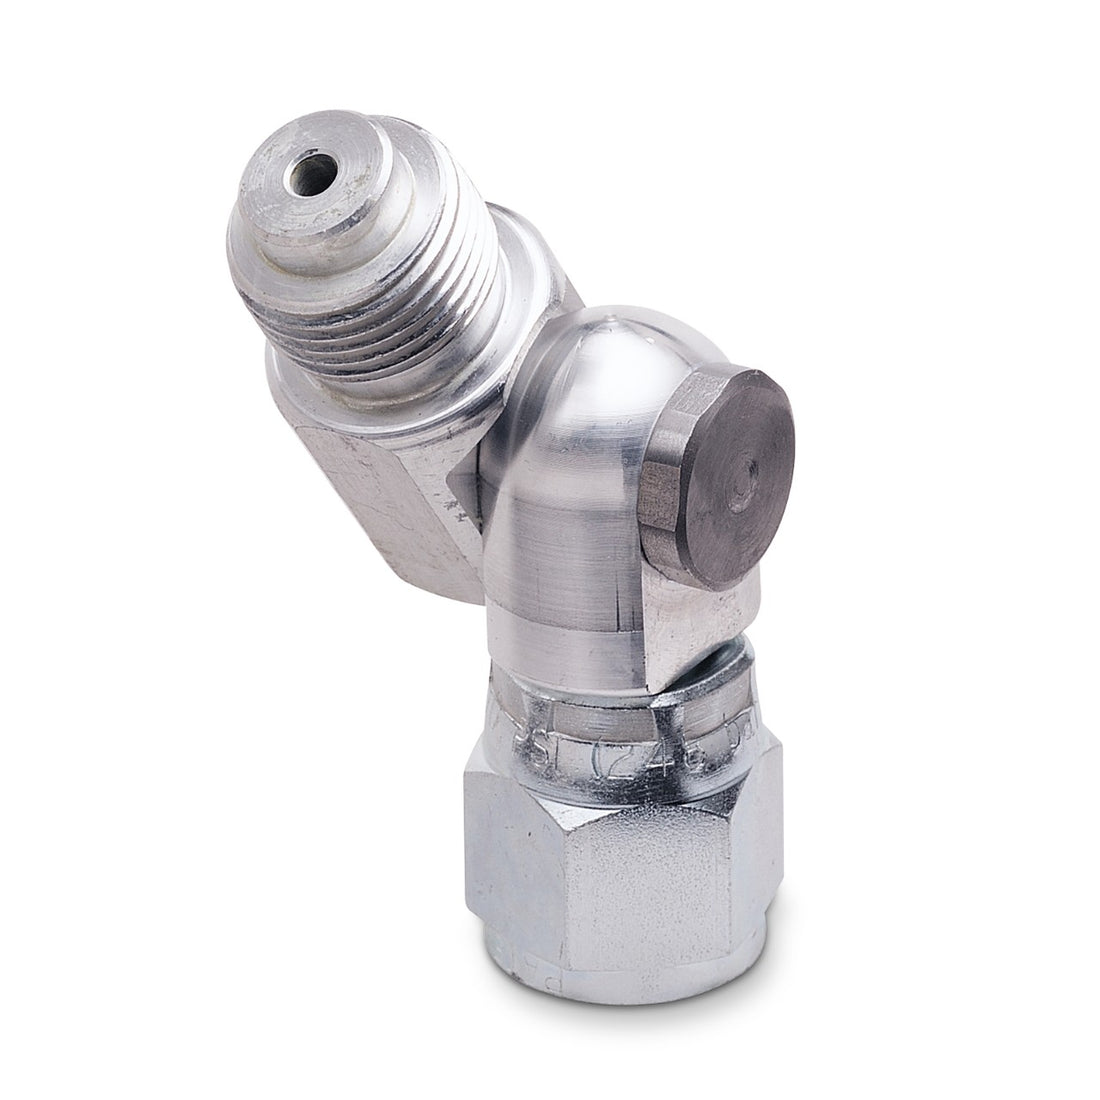 GRACO 180° Easy Turn Directional Spray Nozzle Adapter